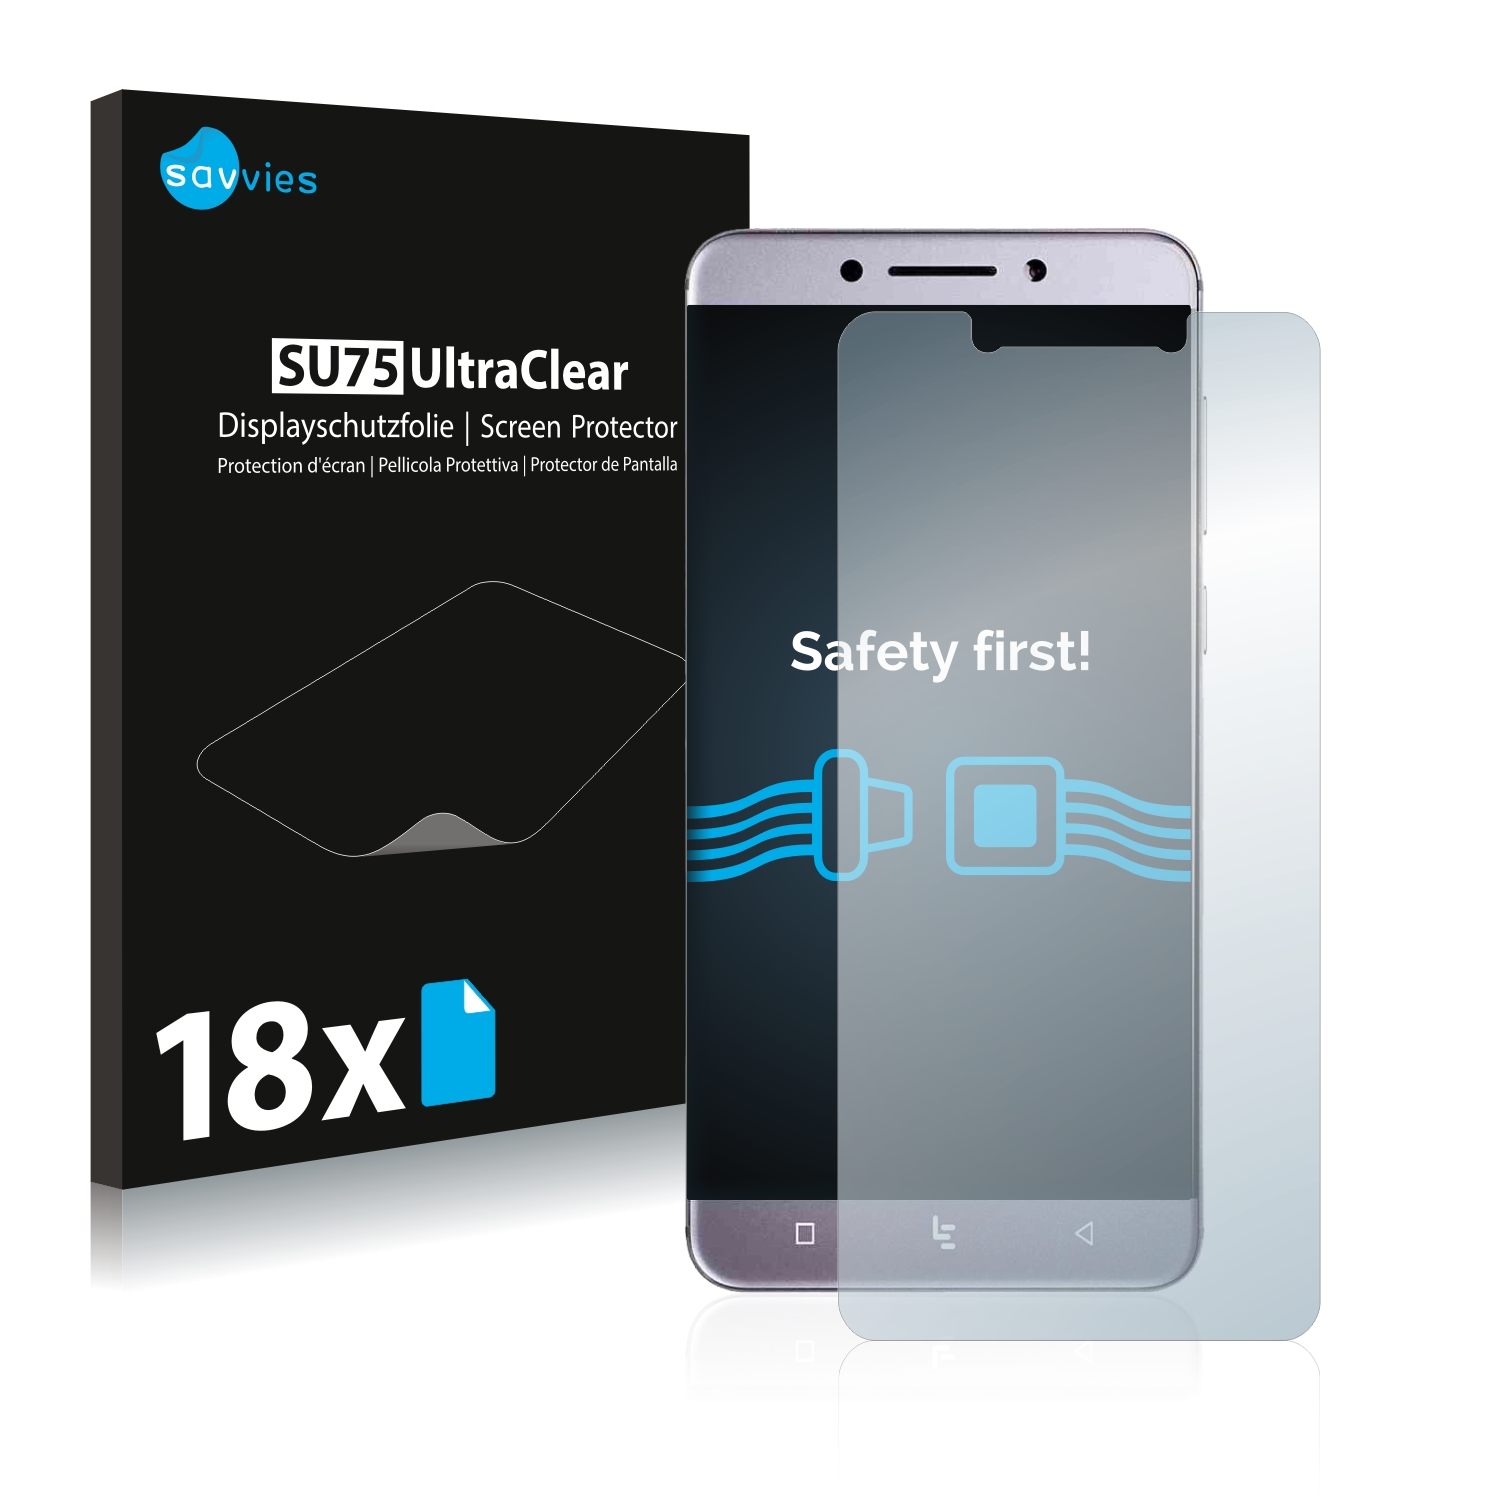 18x Savvies SU75 Screen Protector for LeEco Le S3 | protectionfilms24.com